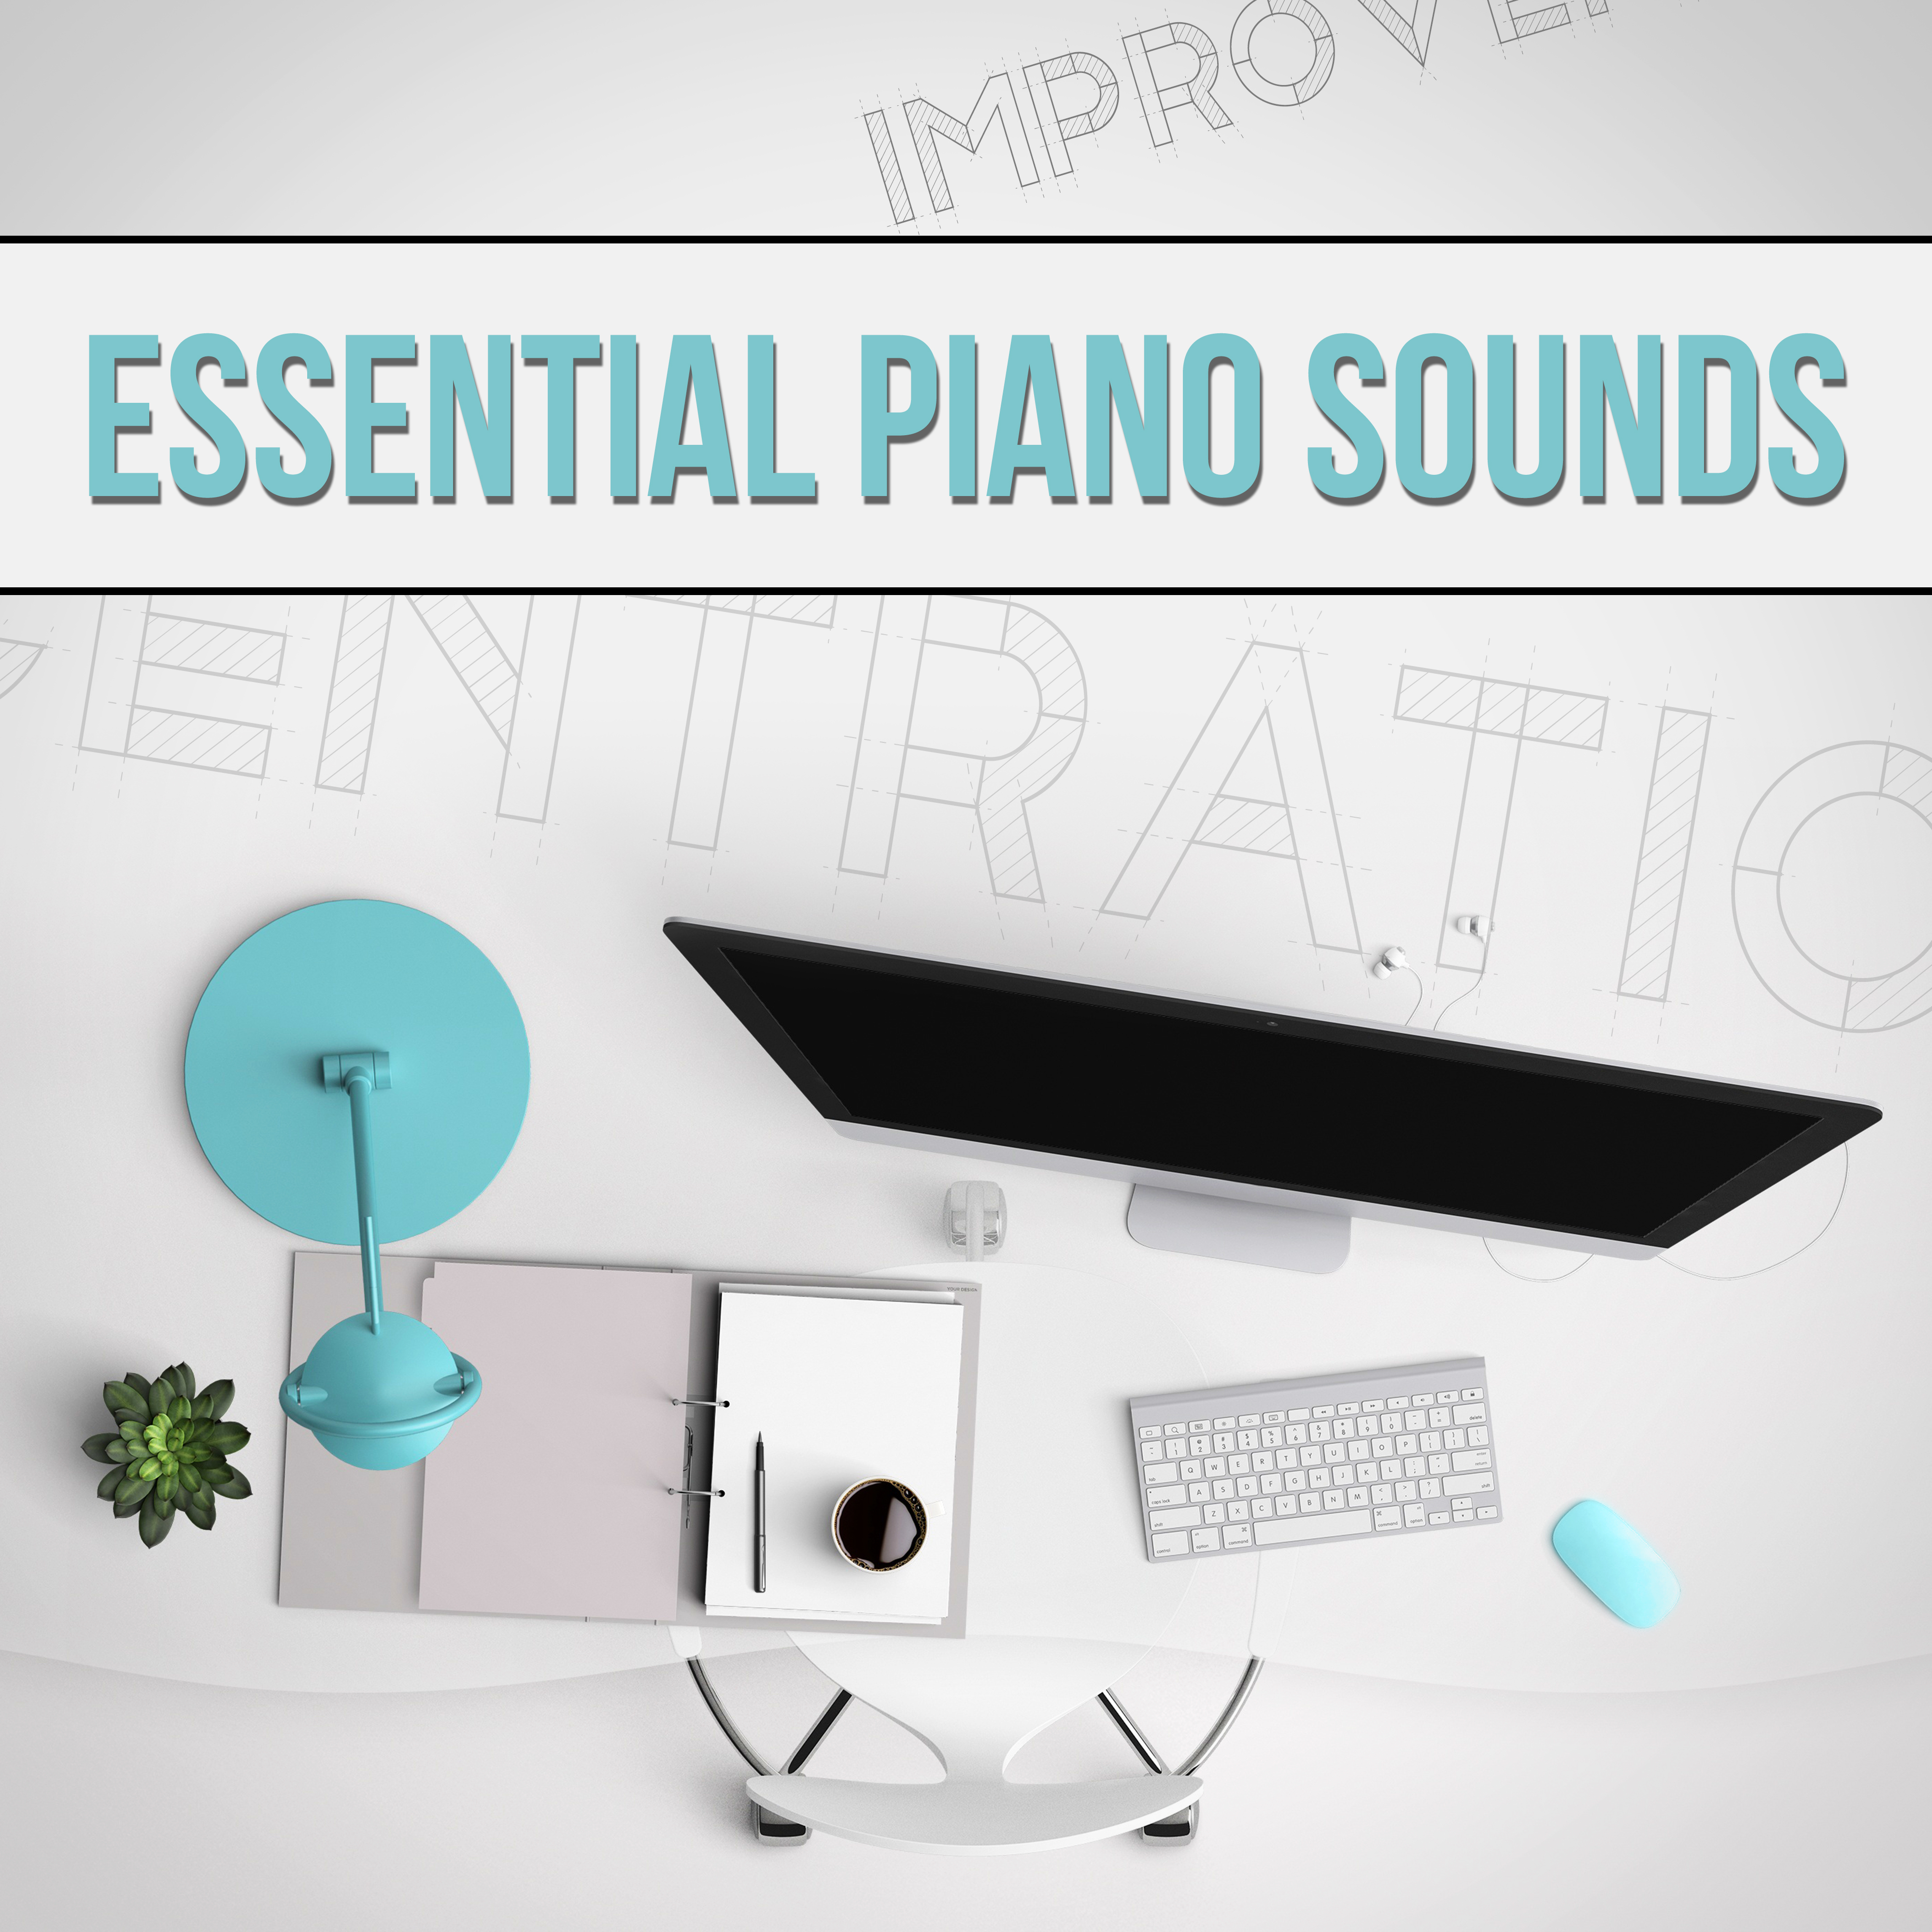 Essential Piano Sounds - Music for Concentration, Focus on Learning, Time for Study, Effective Working Music, Mental Inspiration